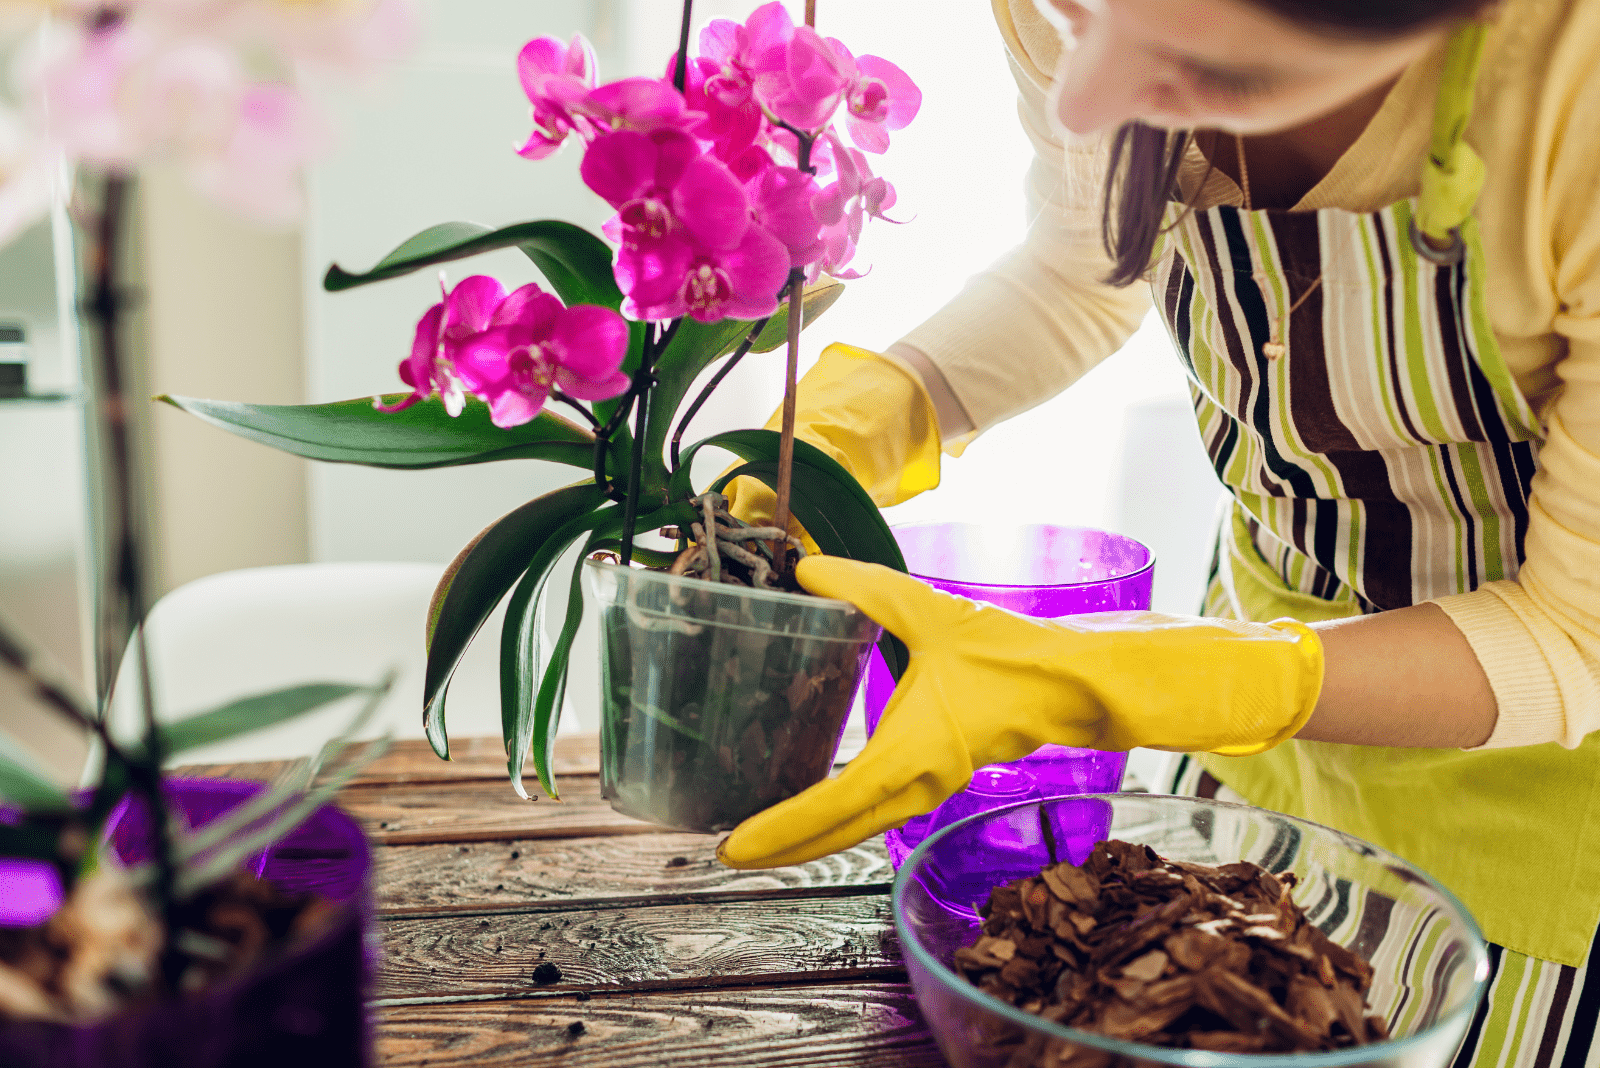 a woman transplants an orchid